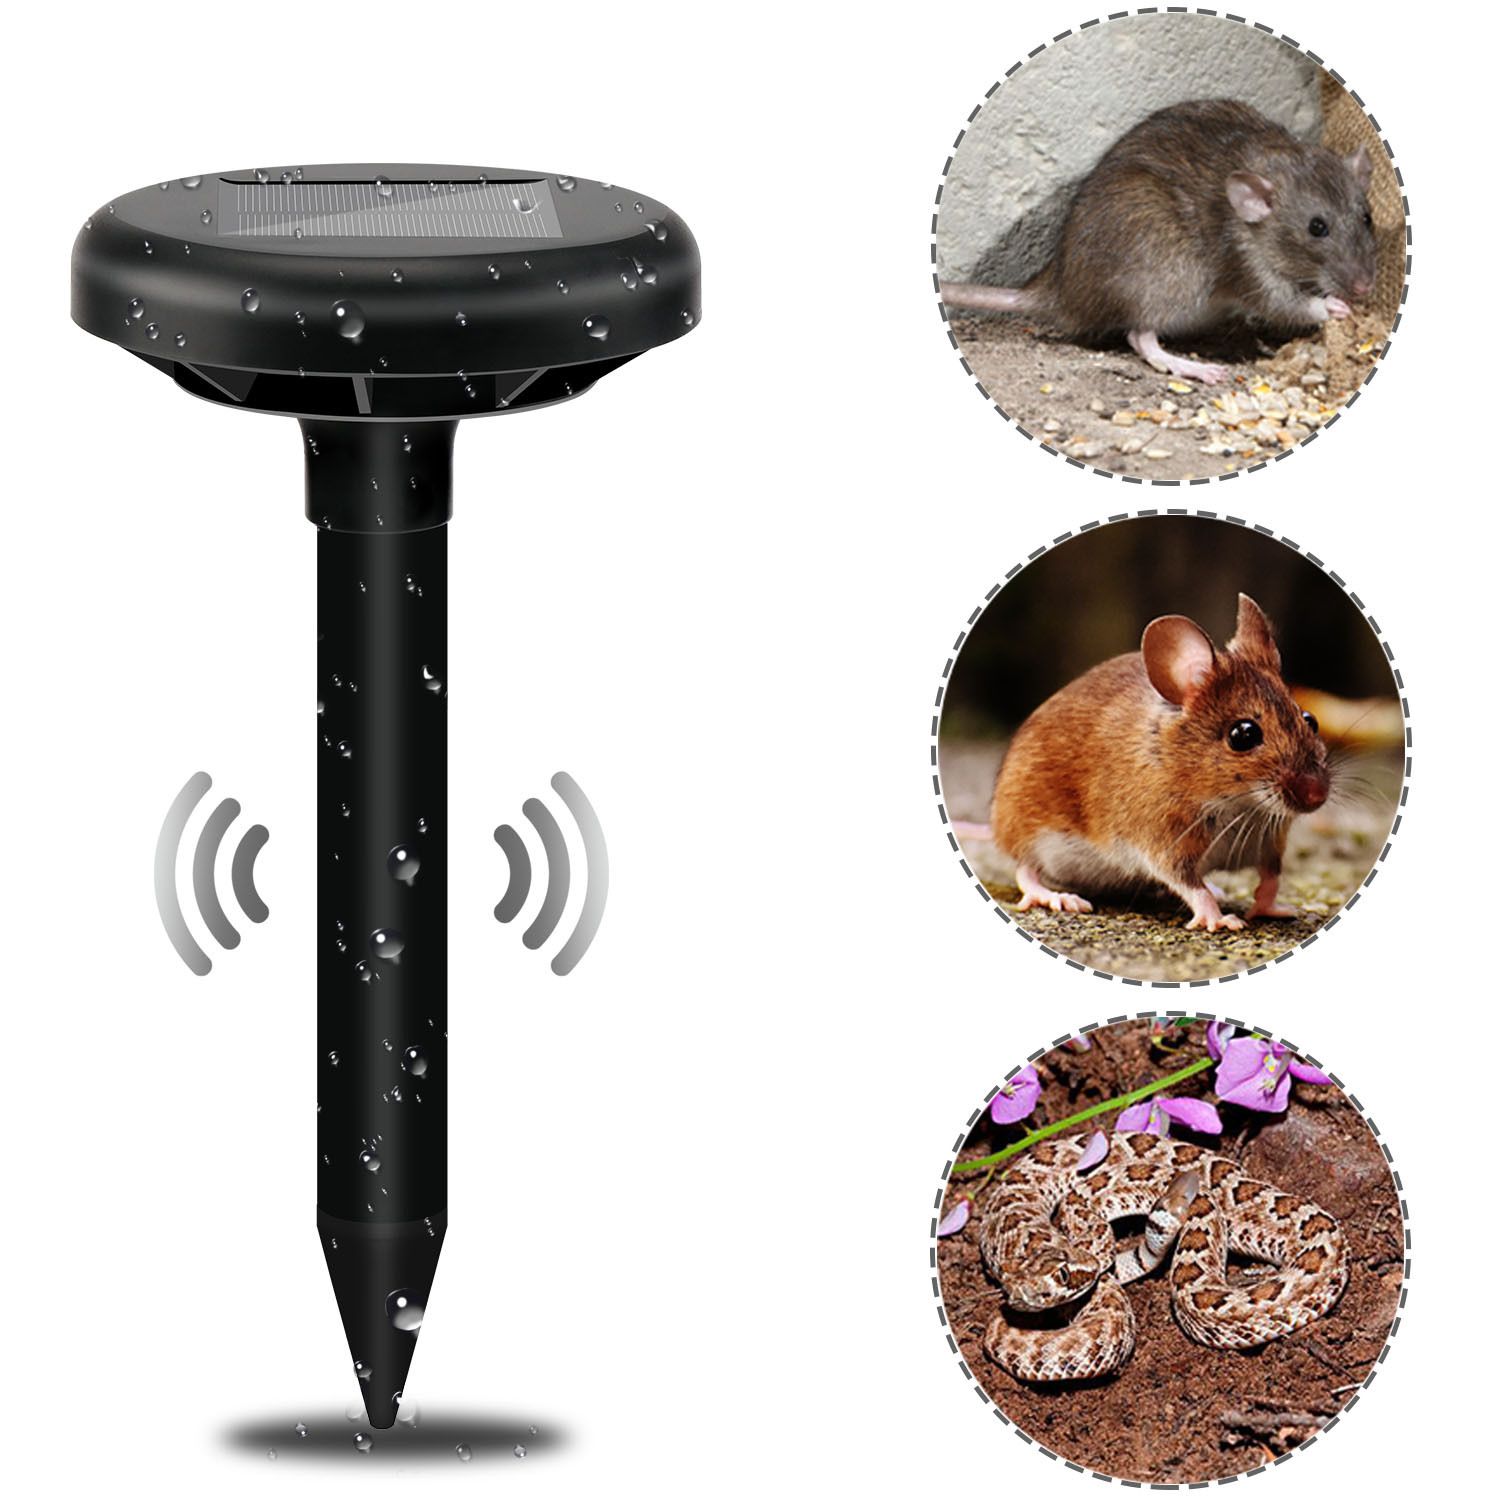 Ultrasonic-Solar-Mouse-Animal-Repeller-Energy-saving-And-Environmental-Protection-Of-Home-Electronic-1727130